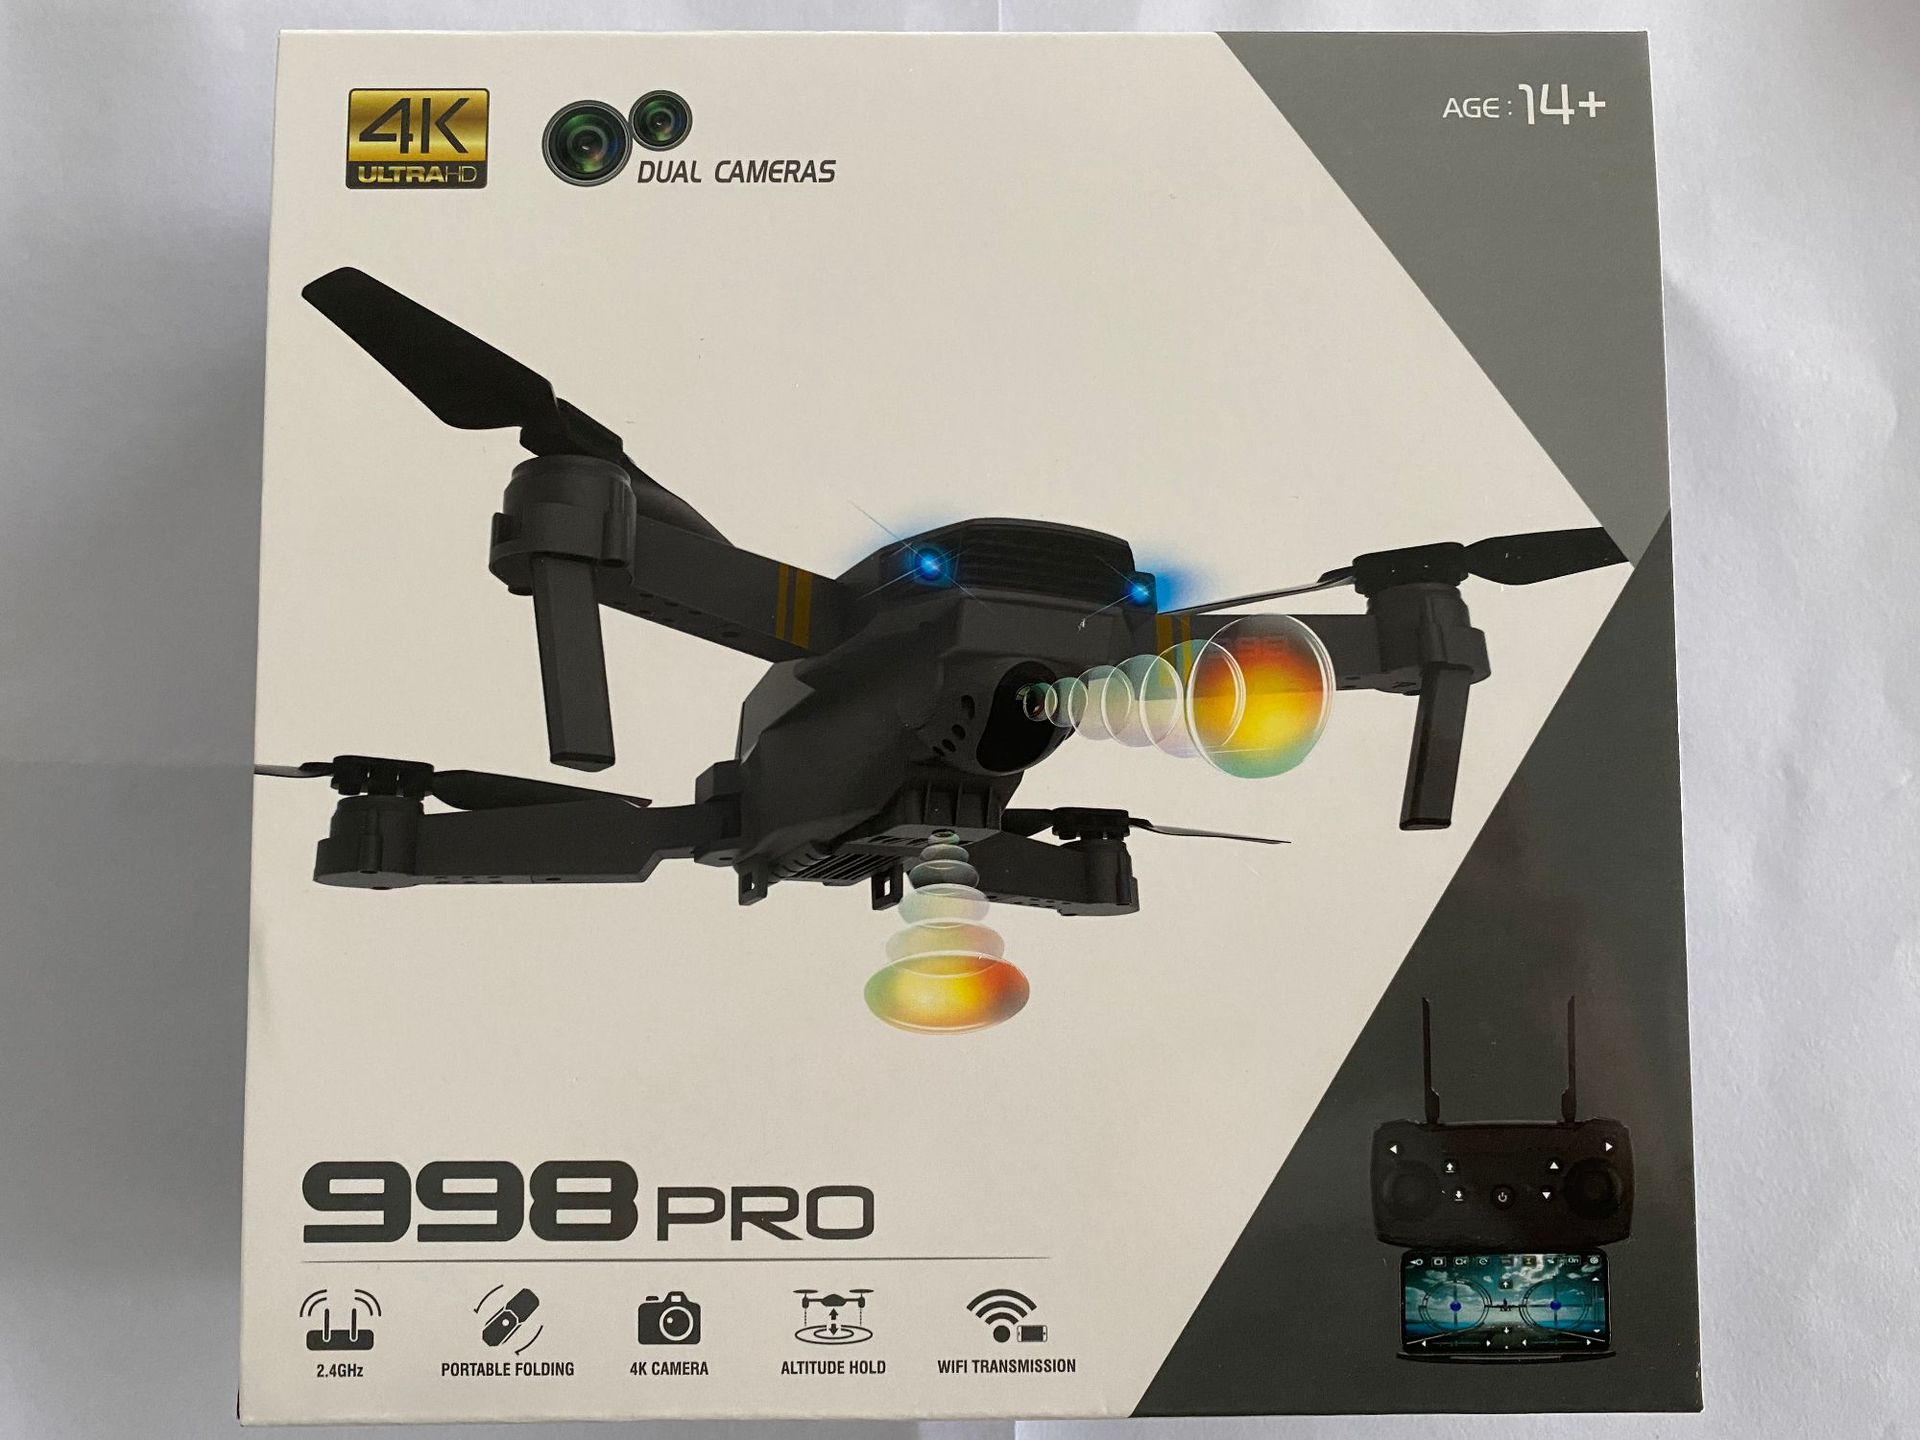 998pro Folding Drone Dj-1 Hd Four-Axis Aircraft for Areal Photography Cross-Border Remote Control Aircraft S168drone